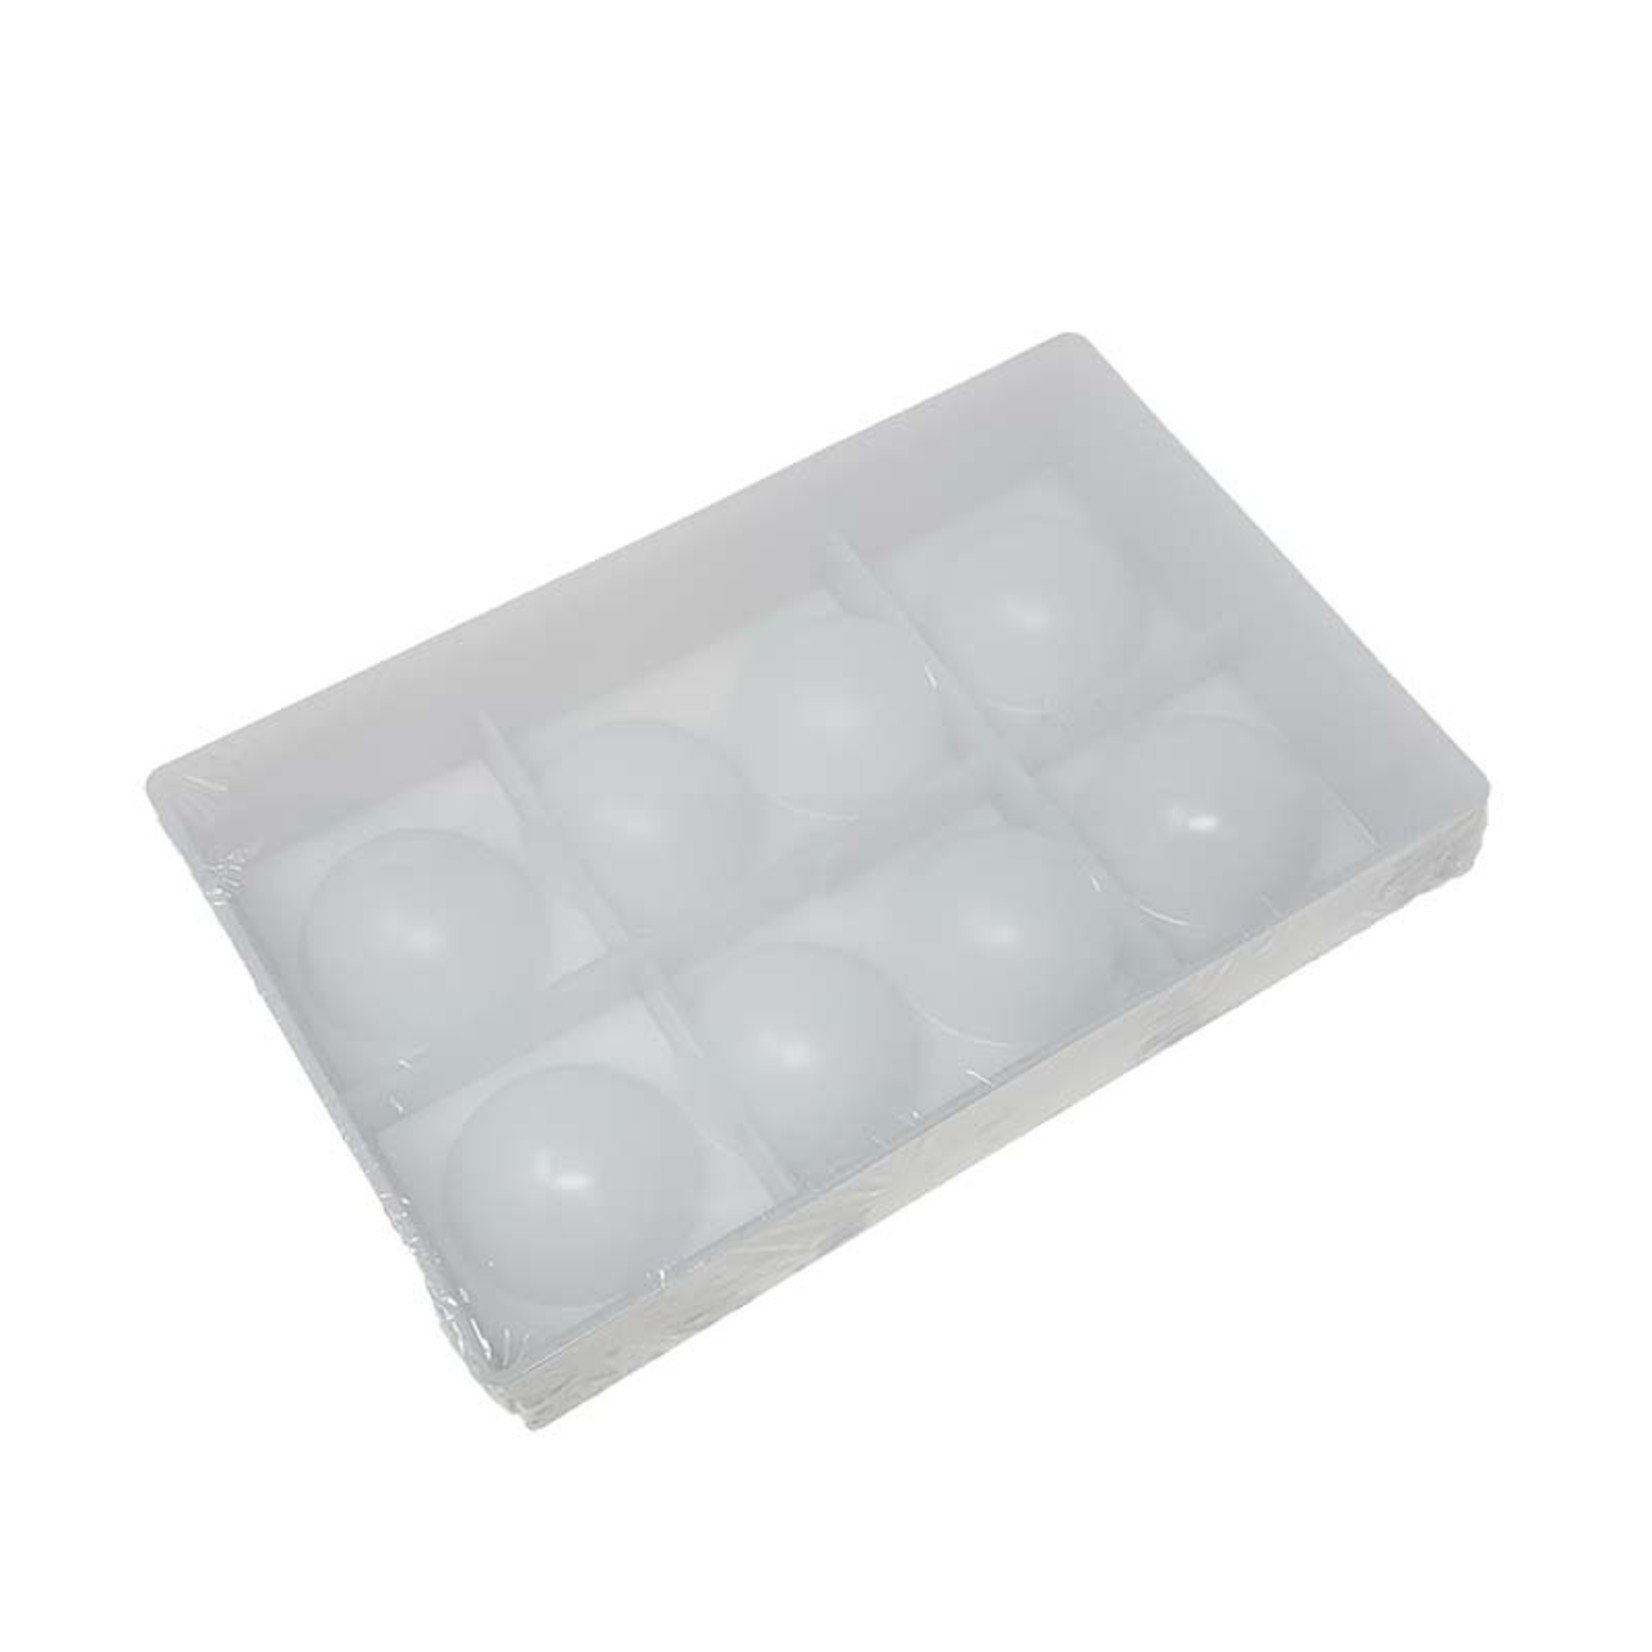 Cacao Barry Cacao Barry - Tritan Chocolate Mold - 5.5cm Sphere (8 cavity) MLD-090535-M00